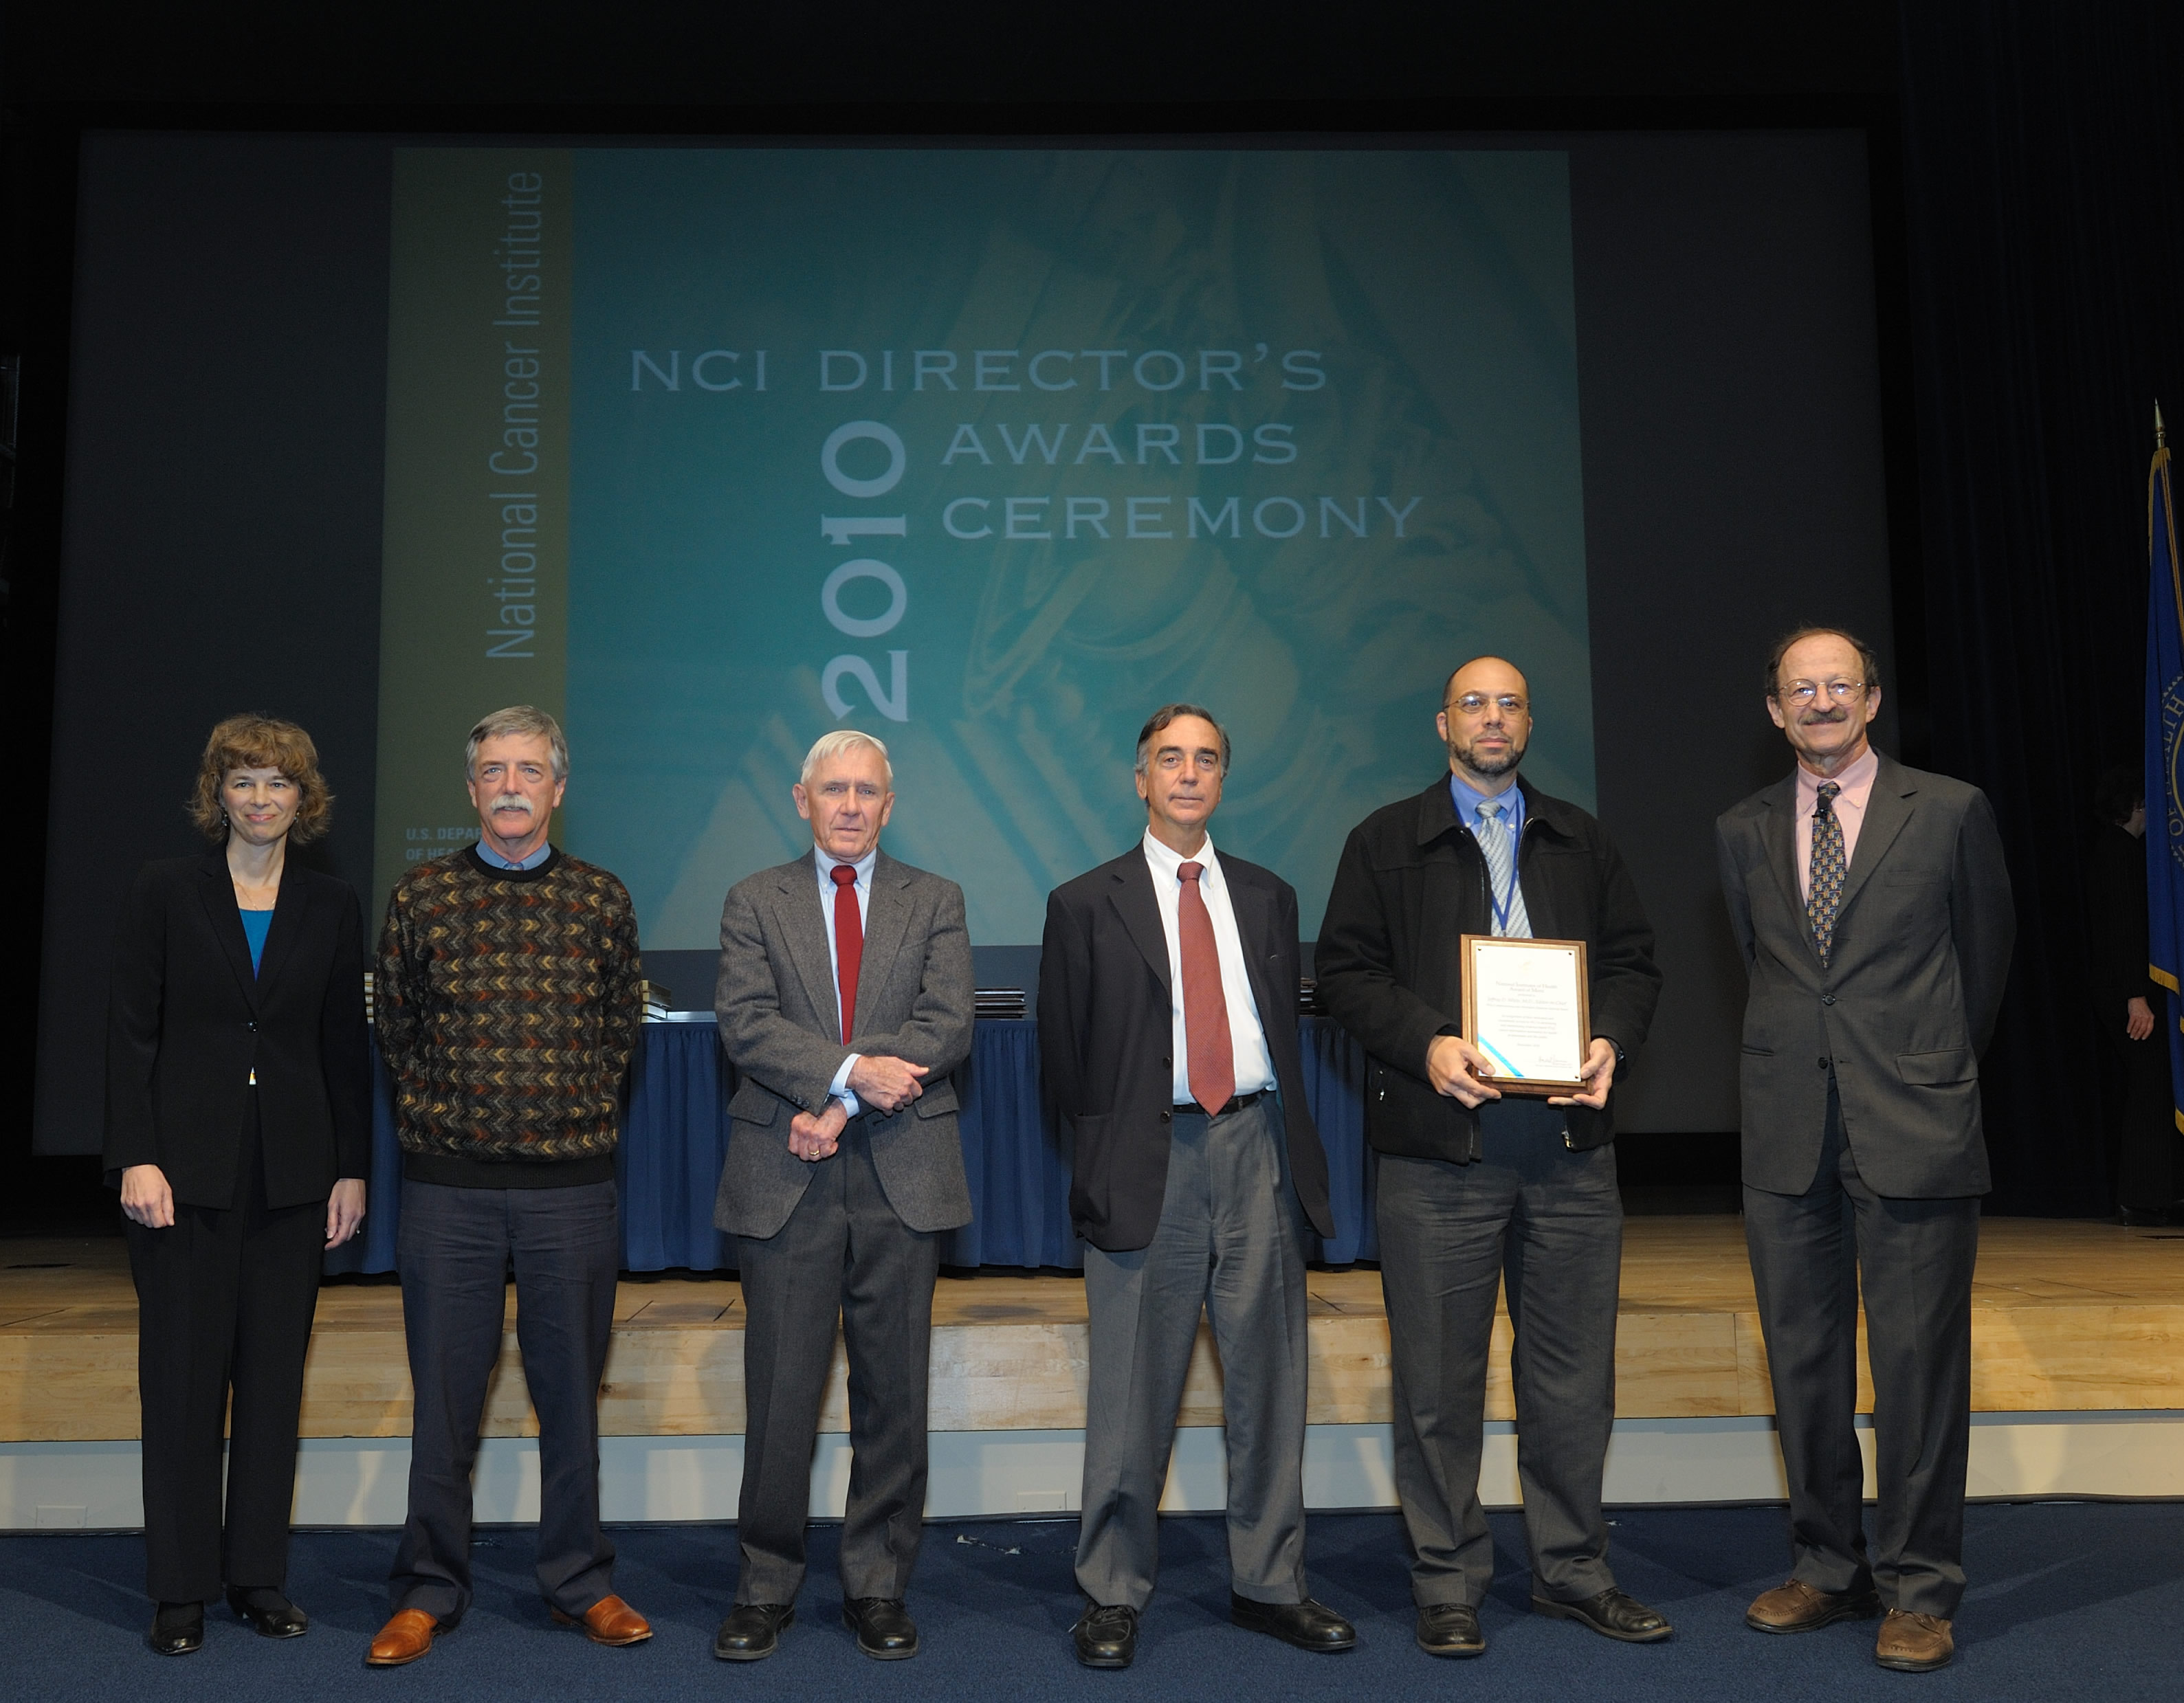 Several members of the PDQ CAM Editorial Board accept the NIH Merit Award